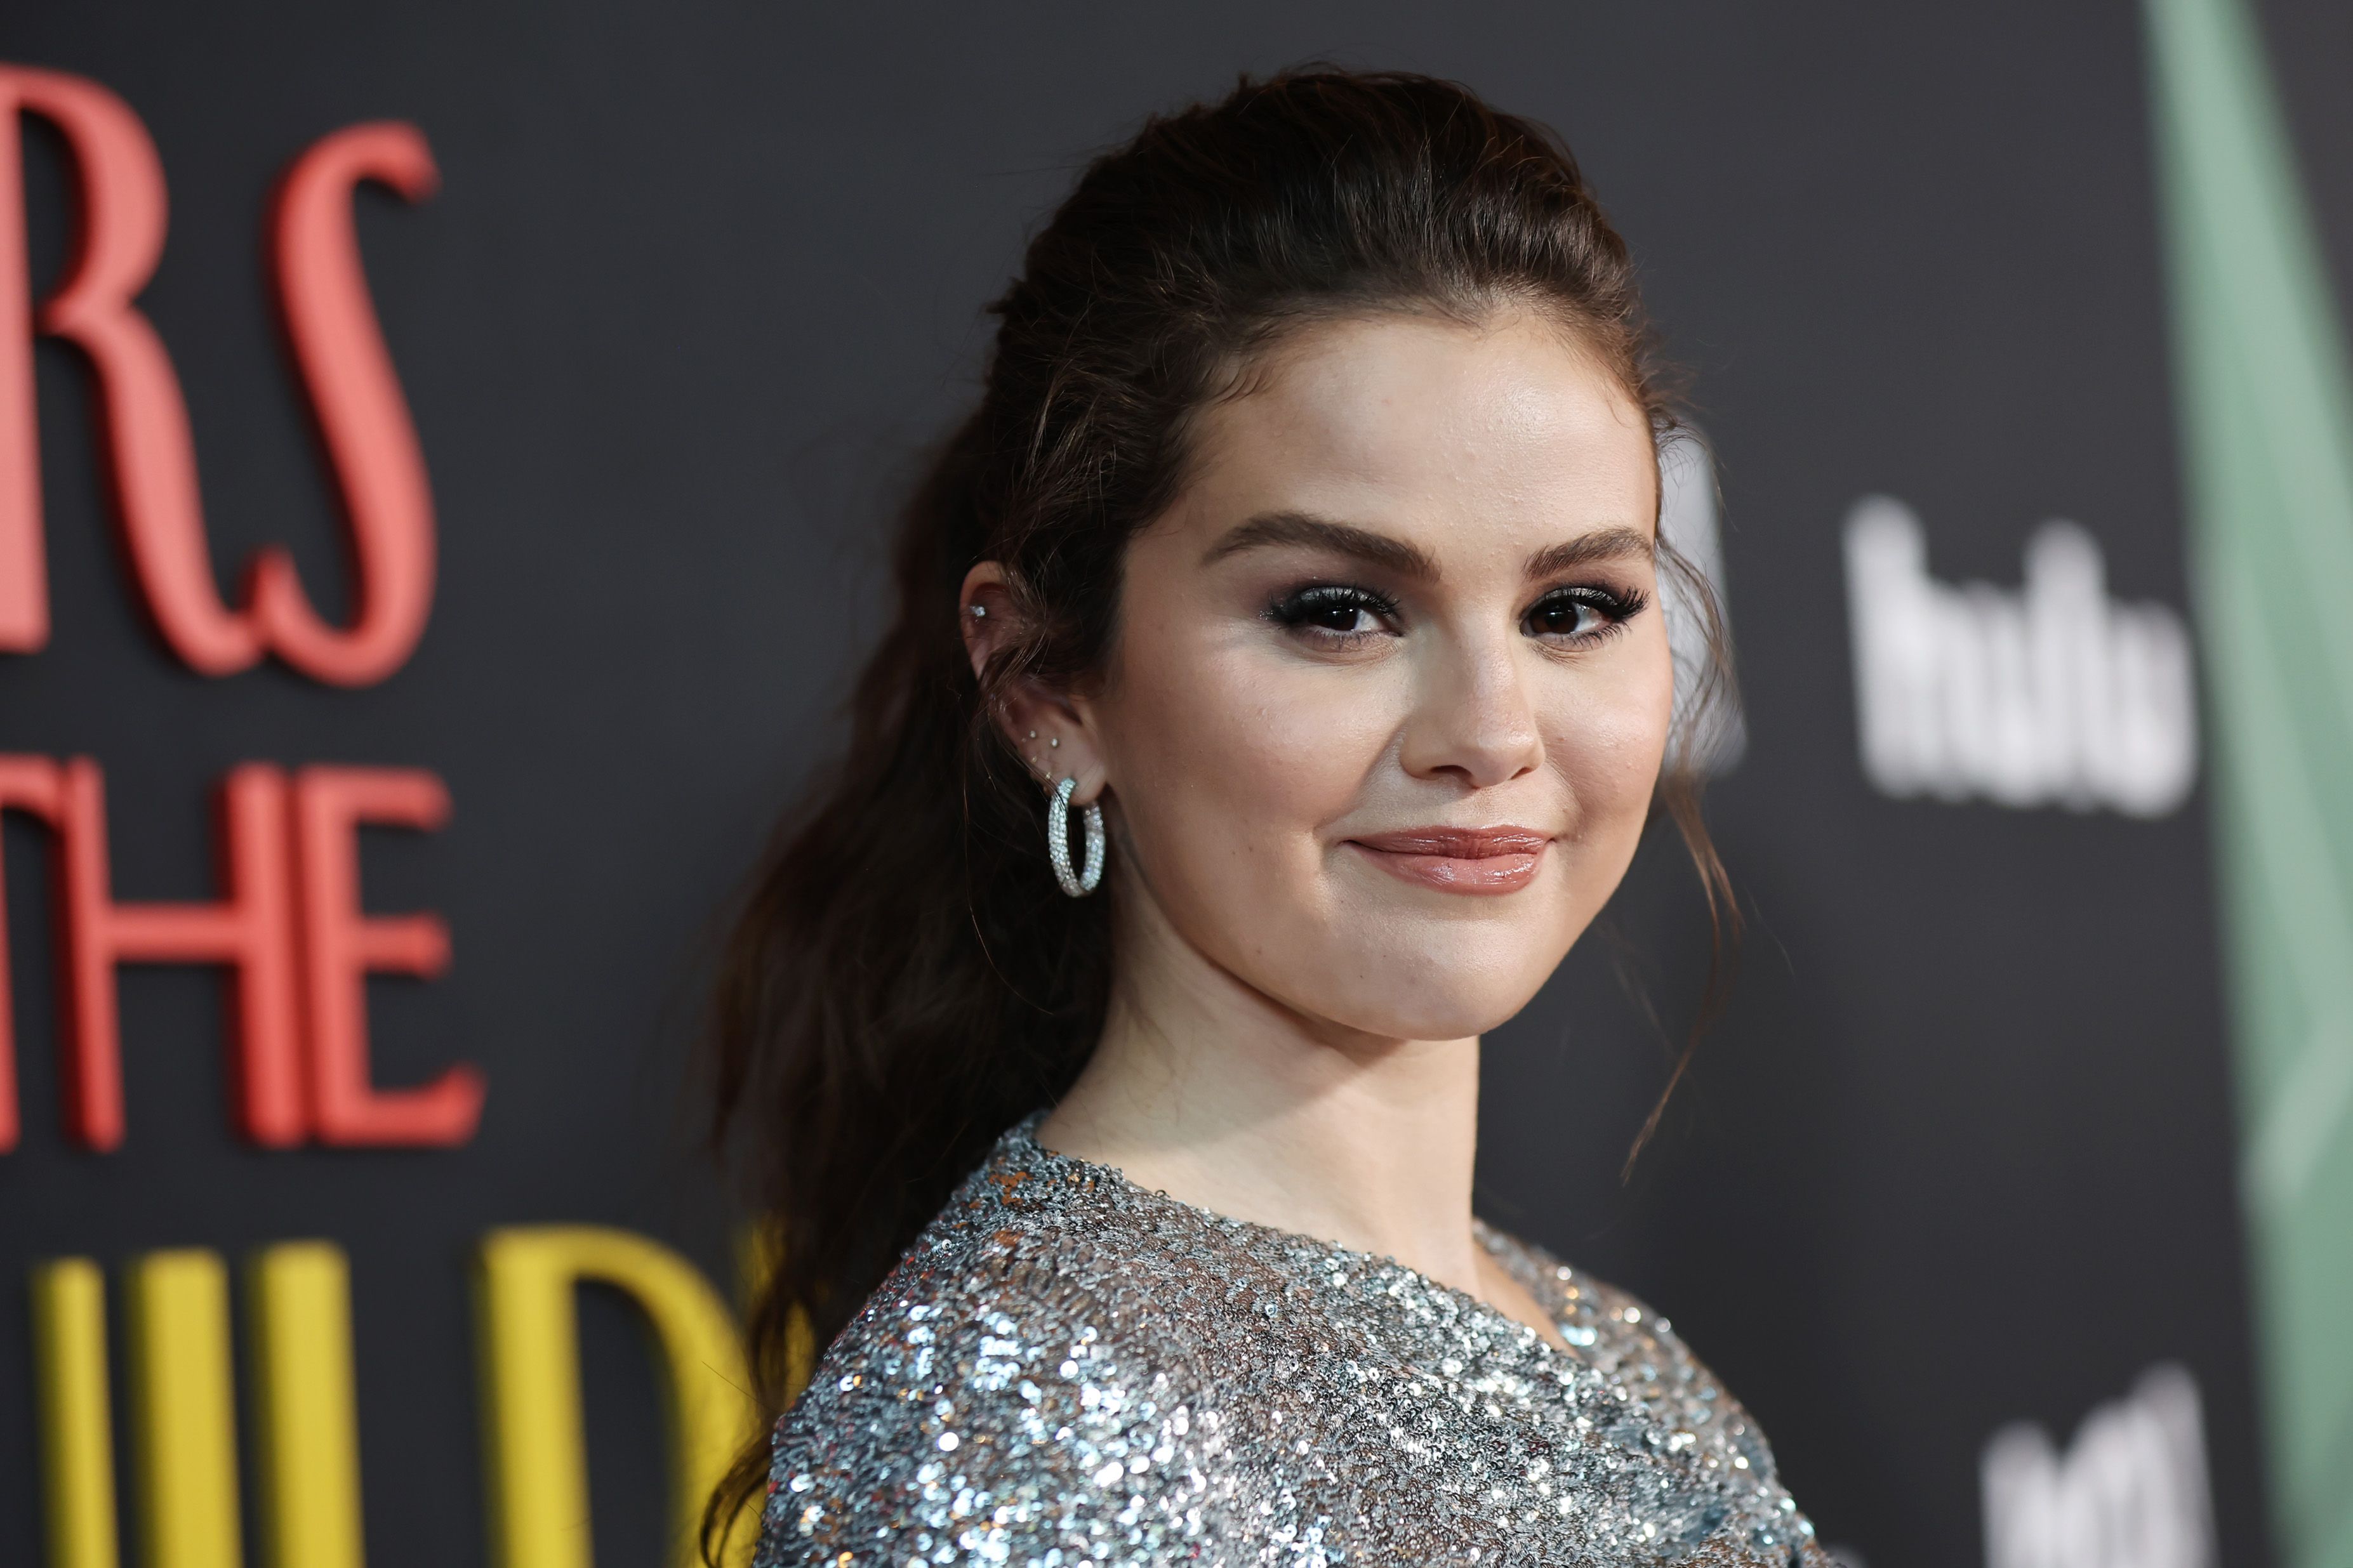 Selena Gomez shares her ‘affordable’ skincare routine for a natural glow